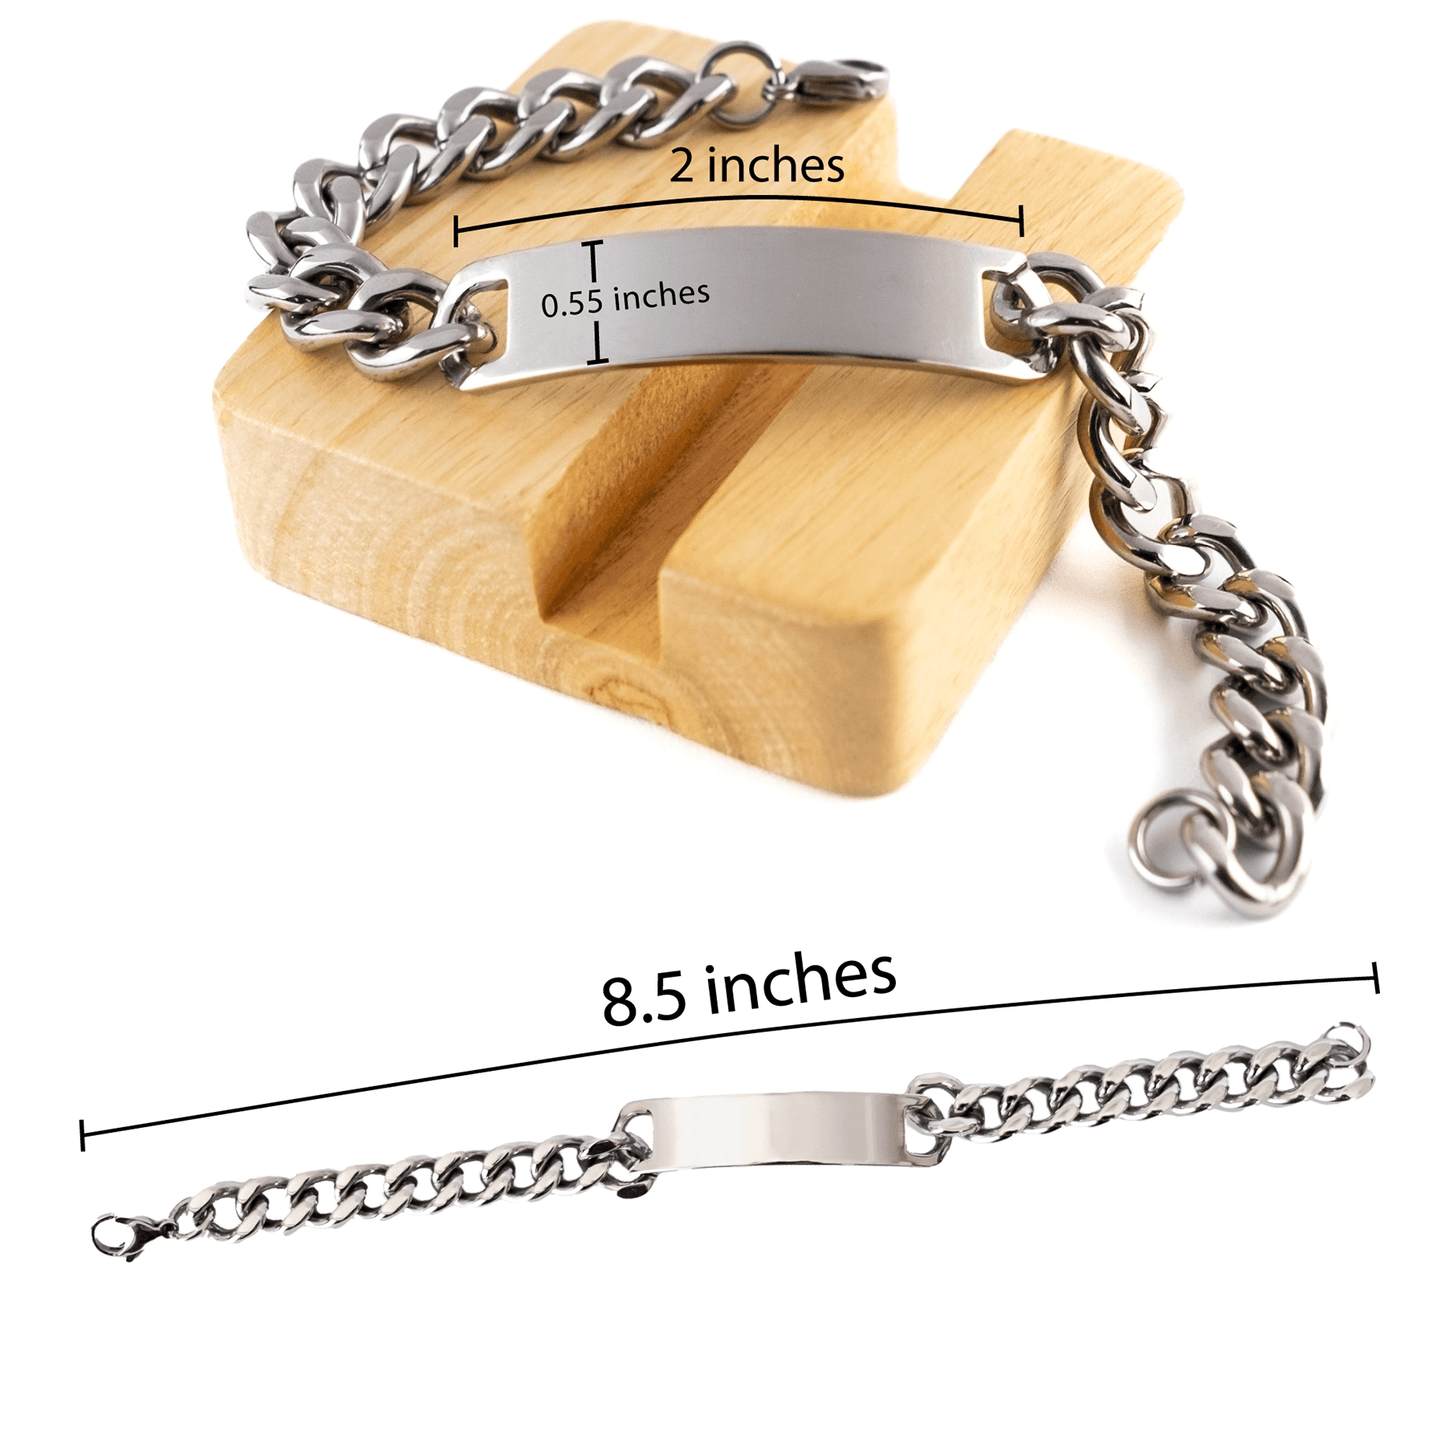 School Bus Driver Cuban Chain Link Engraved Bracelet - Thanks for being who you are - Birthday Christmas Jewelry Gifts Coworkers Colleague Boss - Mallard Moon Gift Shop